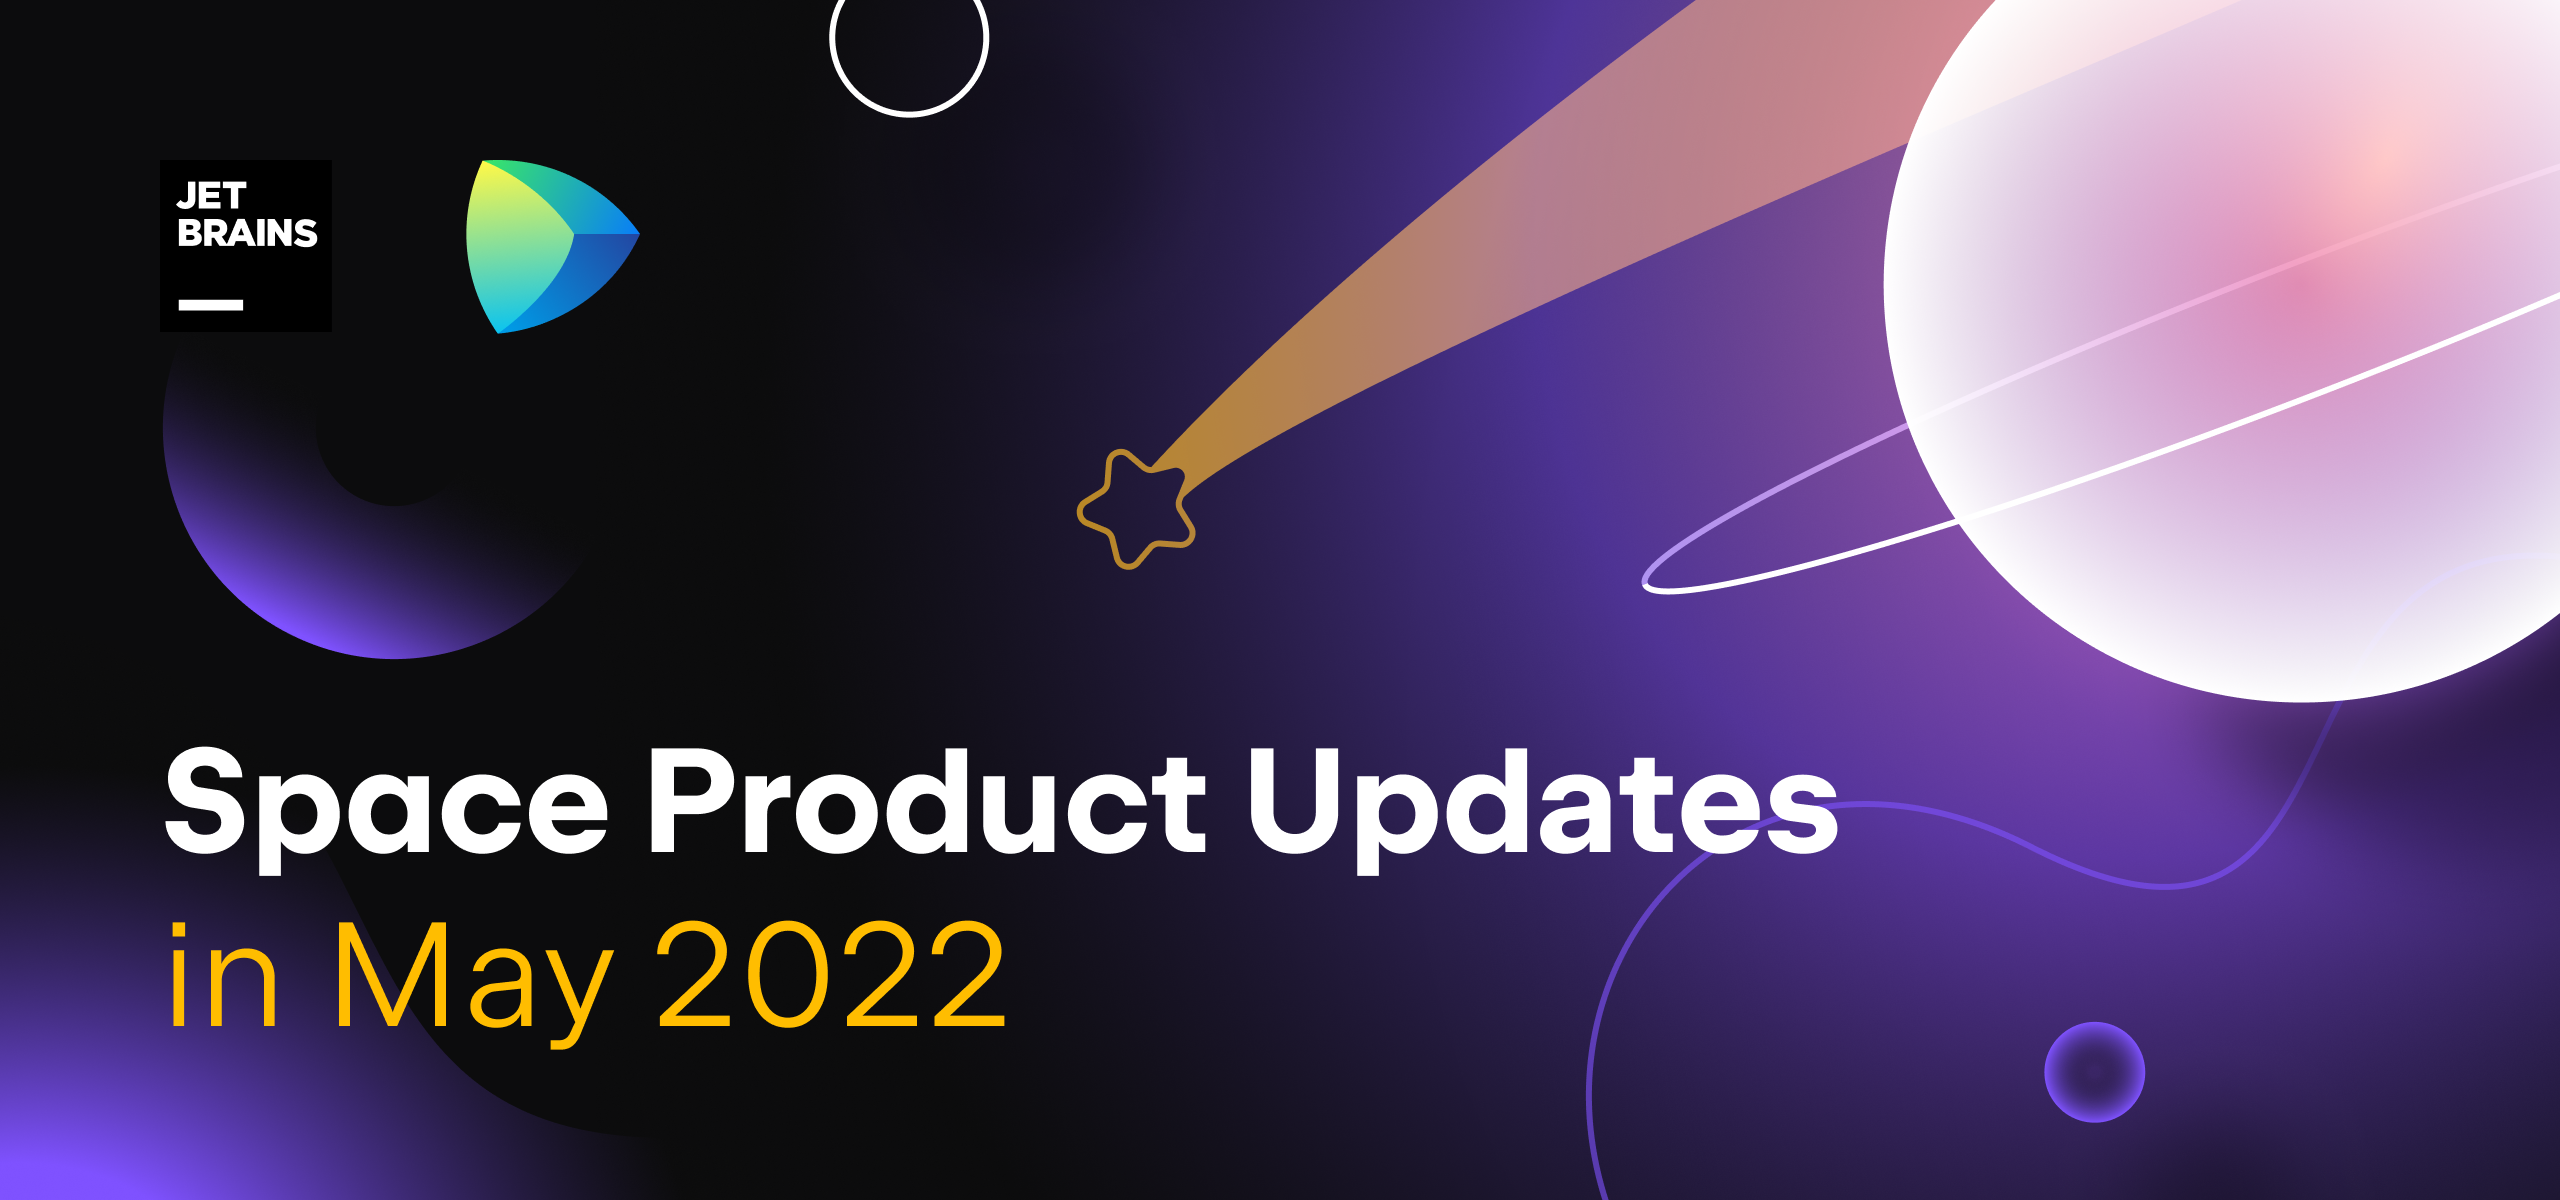 Space Product Updates in May 2022